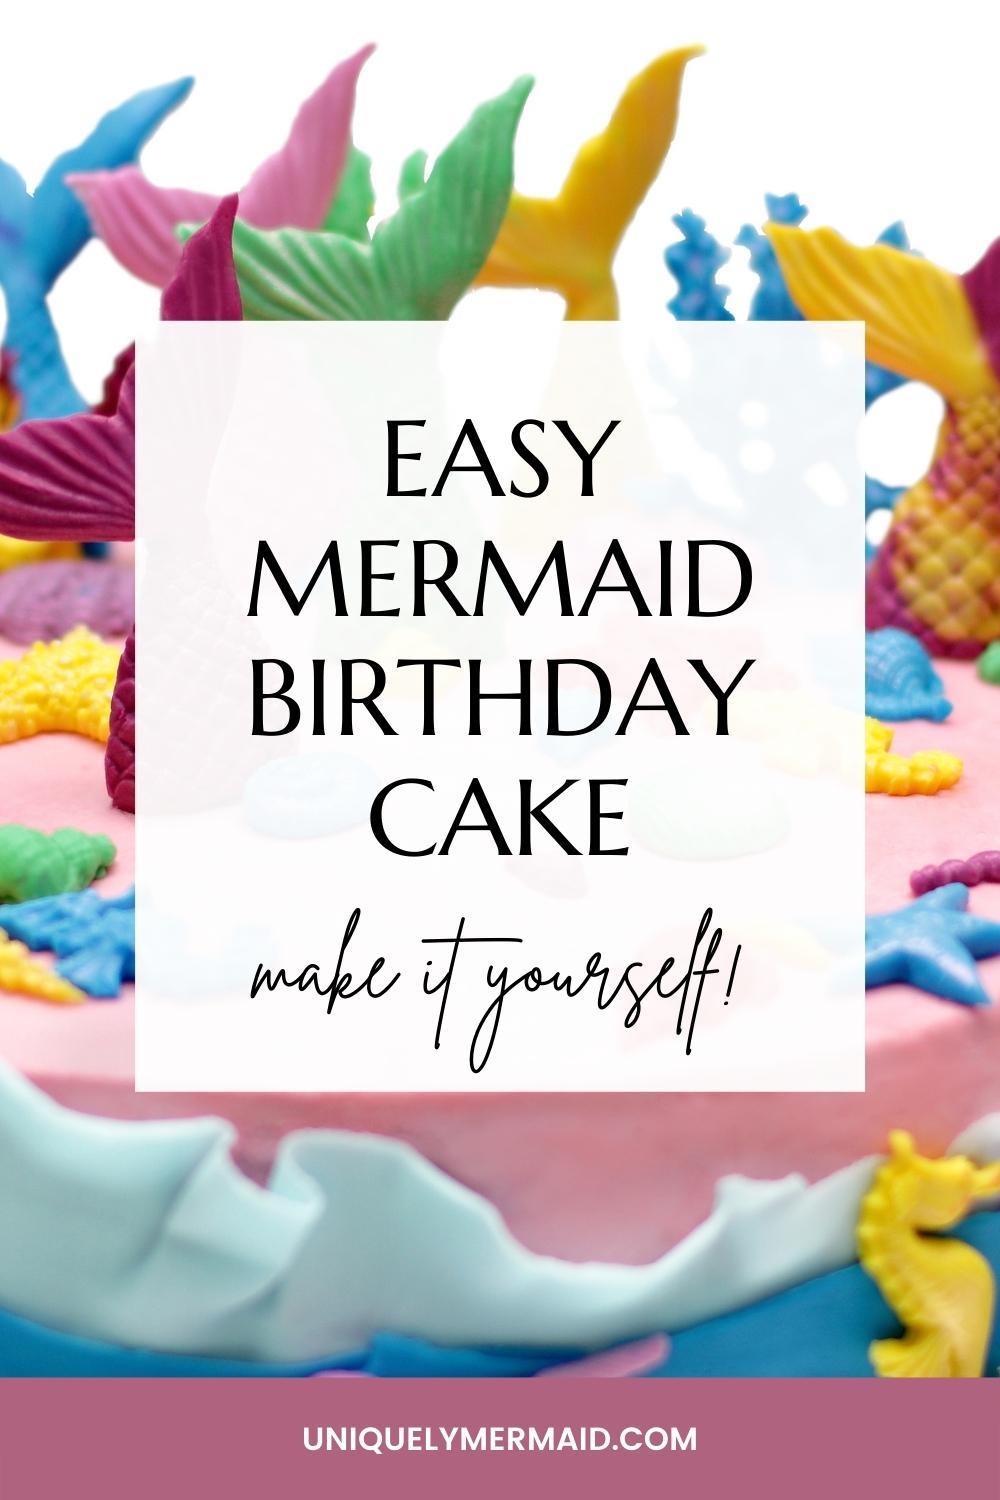 A do-it-yourself easy mermaid birthday cake that will take the cake at your next birthday bash!